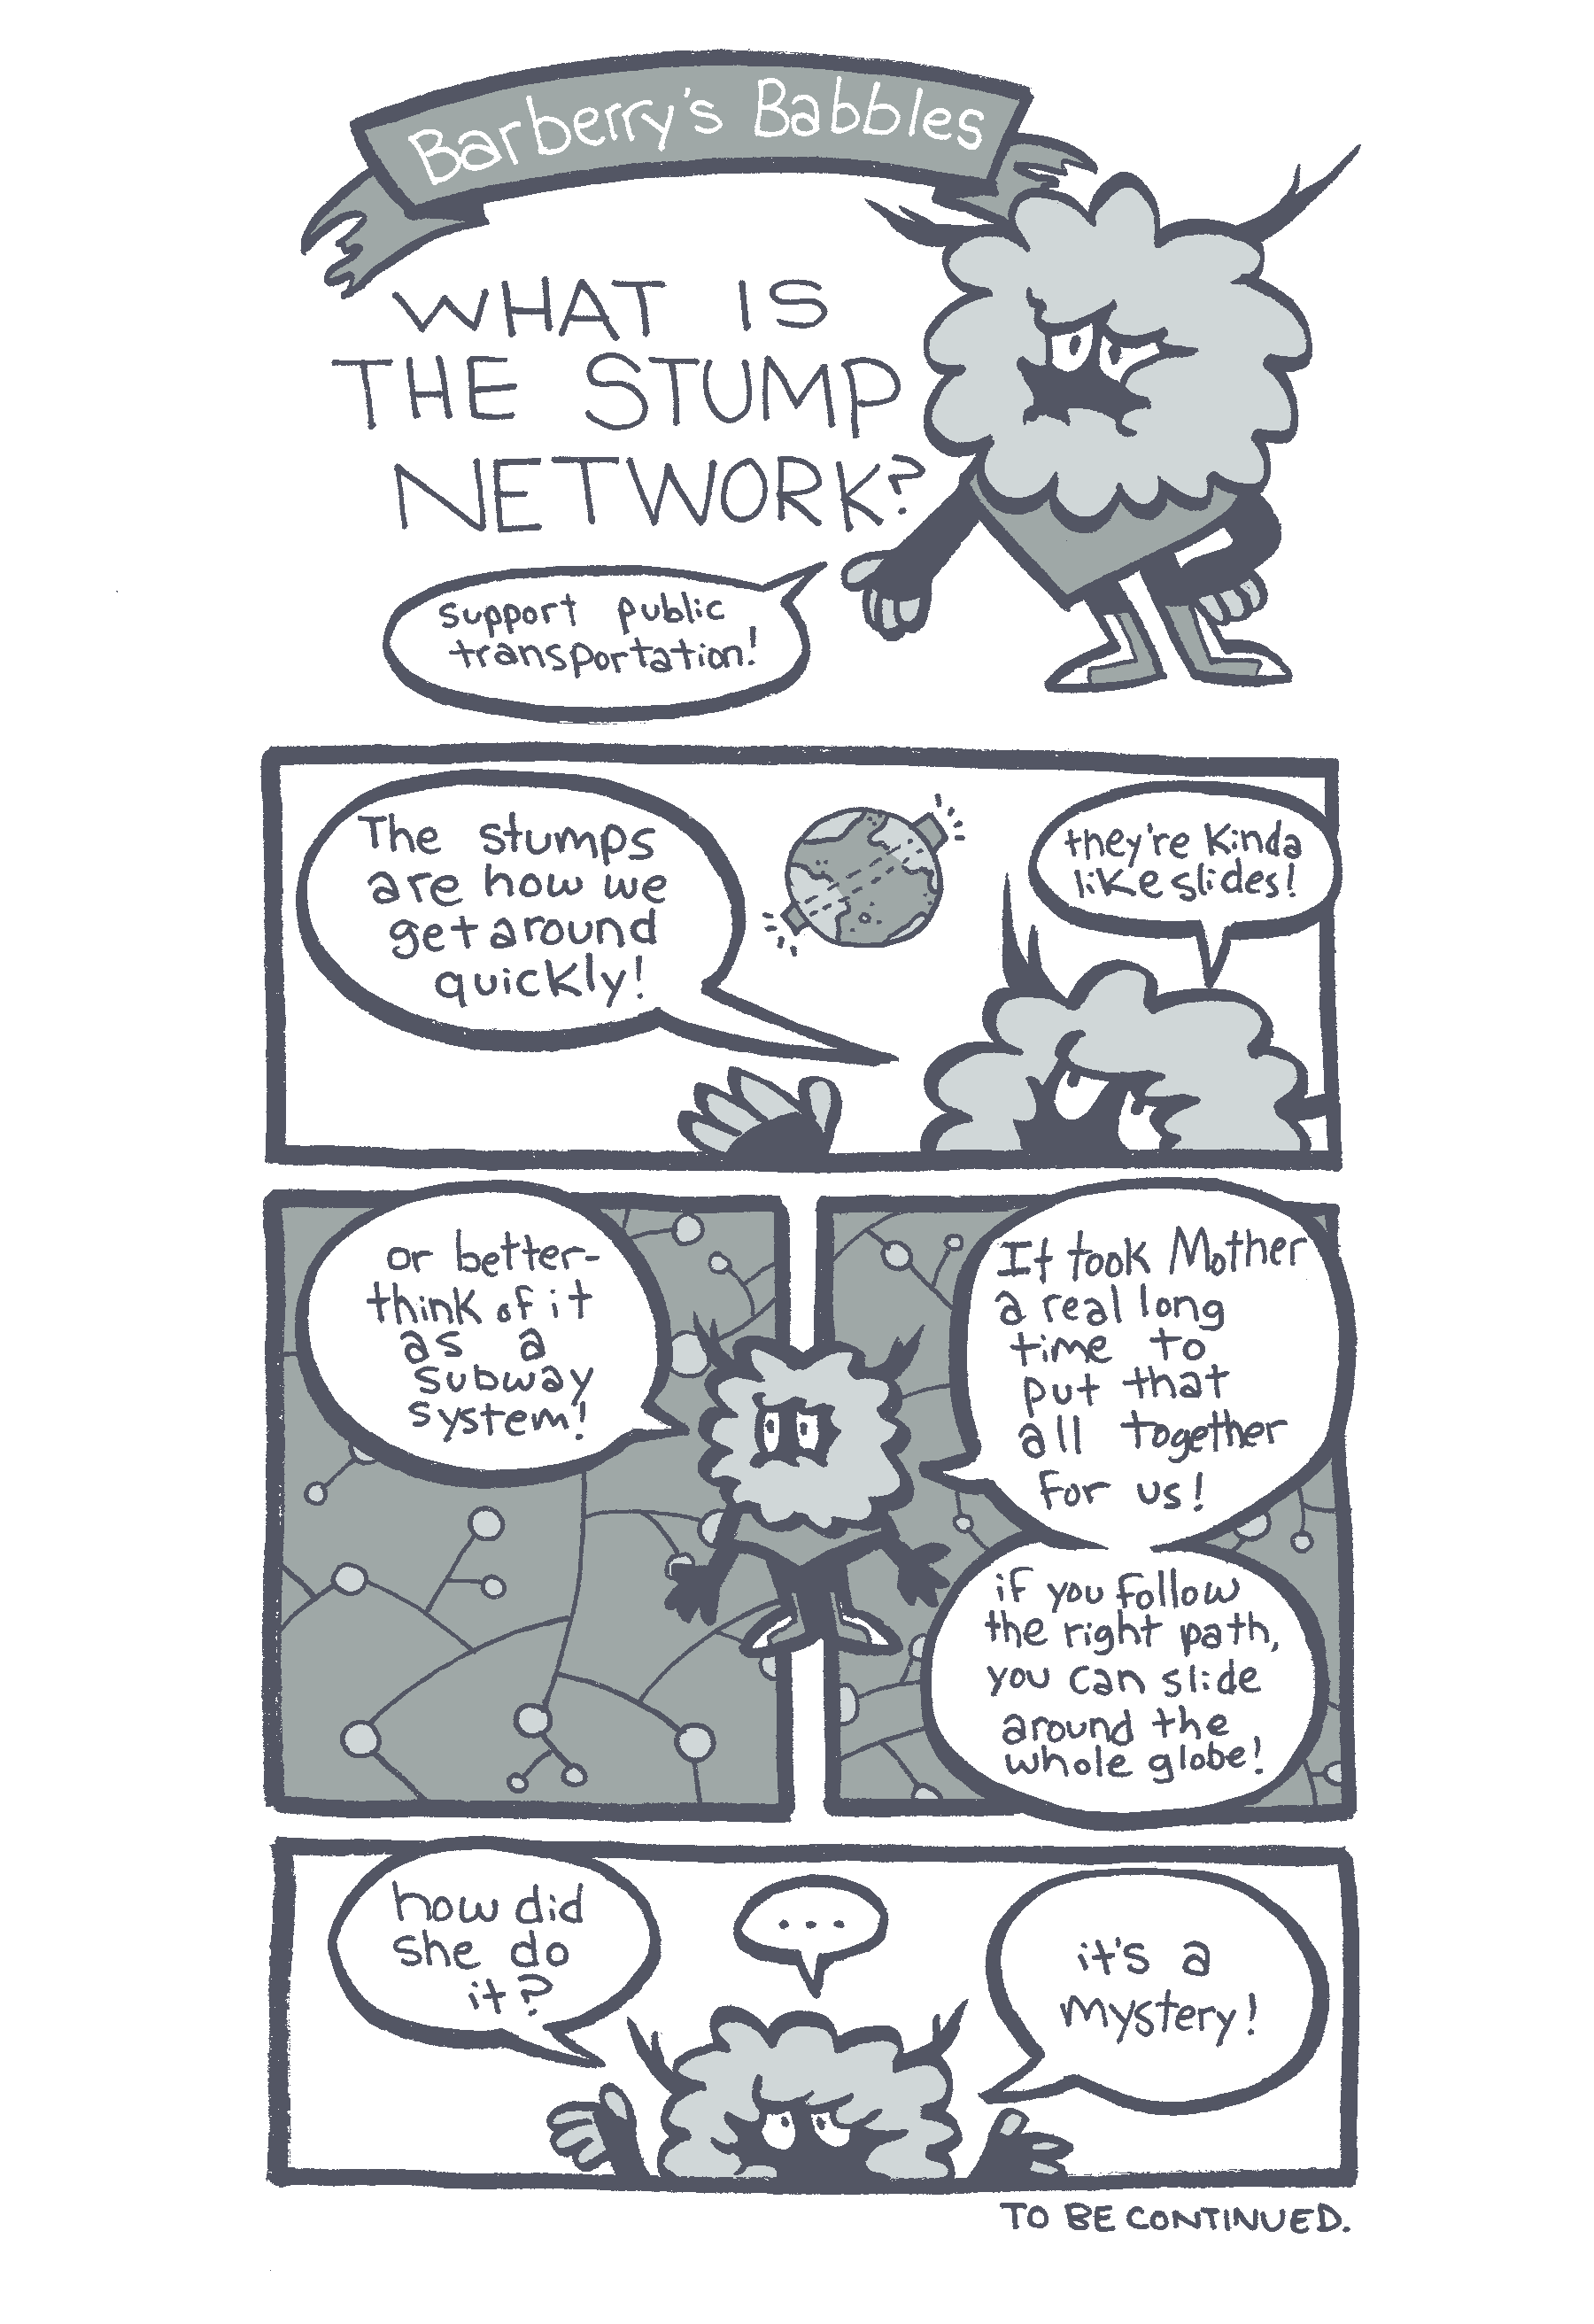 Barberry's Babbles - What is the Stump Network? pt 1